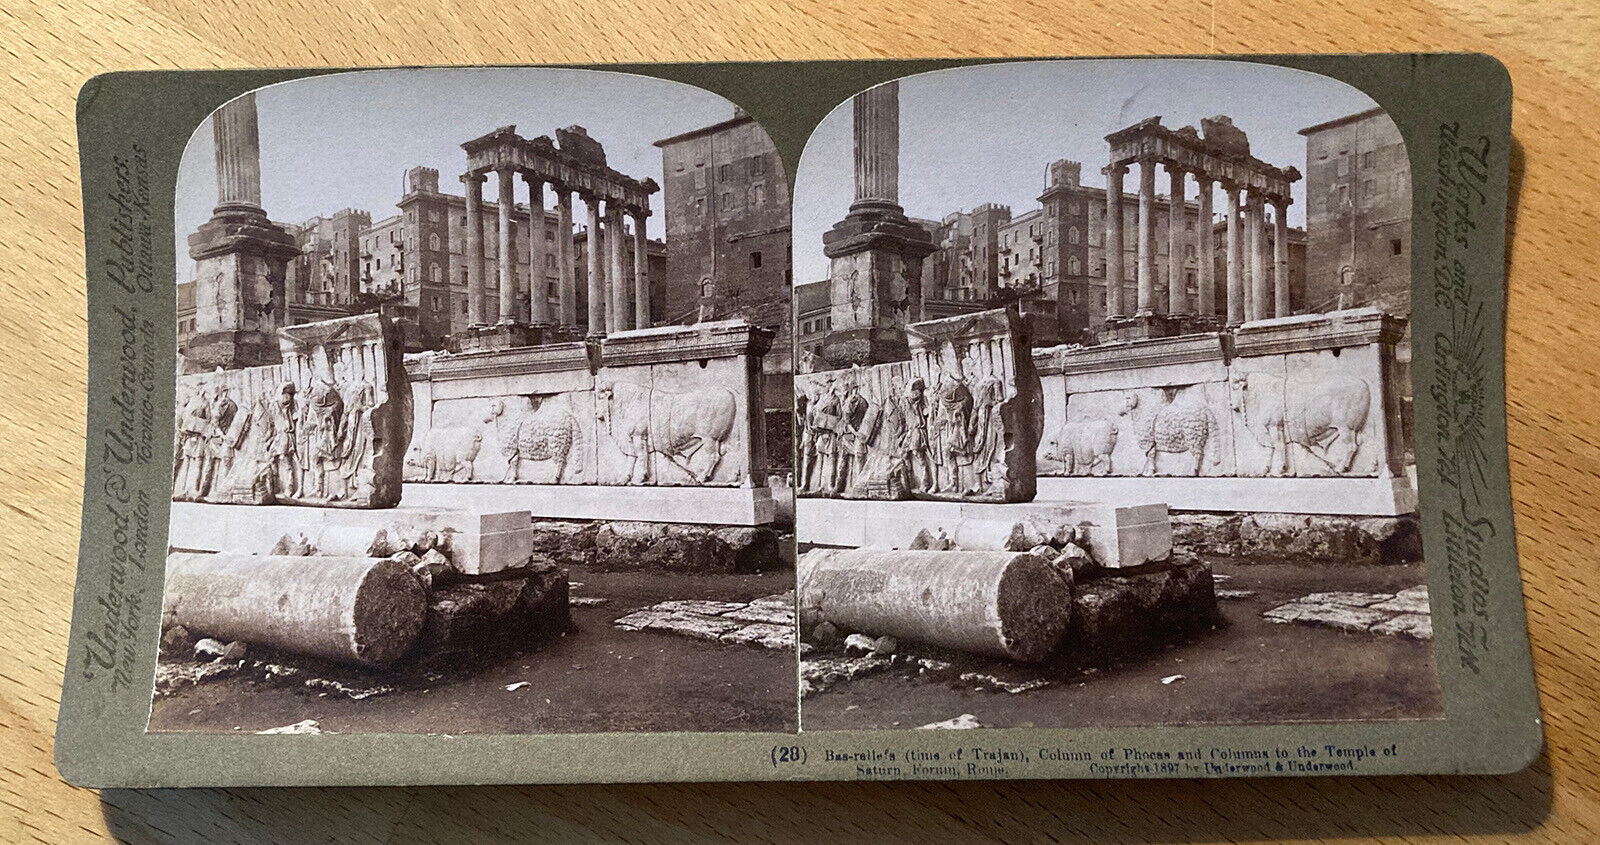 Column of Phocas and Columns to the Temple of Saturn – Rome – 1897 – Stereoview